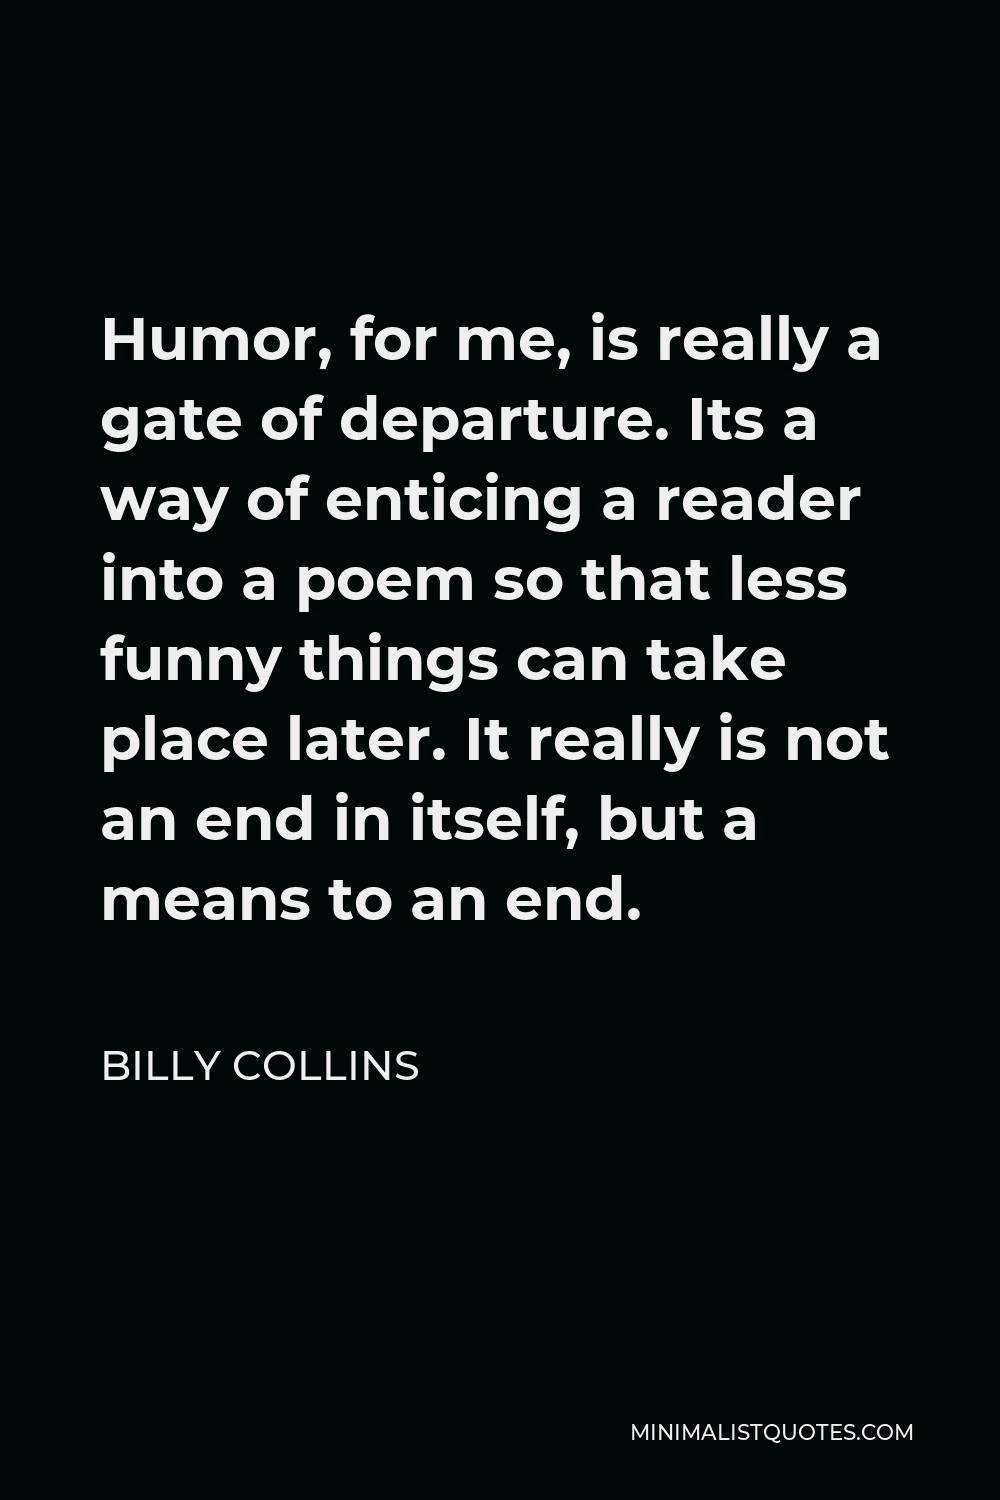 Billy Collins Quote - Humor, for me, is really a gate of departure. Its a way of enticing a reader into a poem so that less funny things can take place later. It really is not an end in itself, but a means to an end.